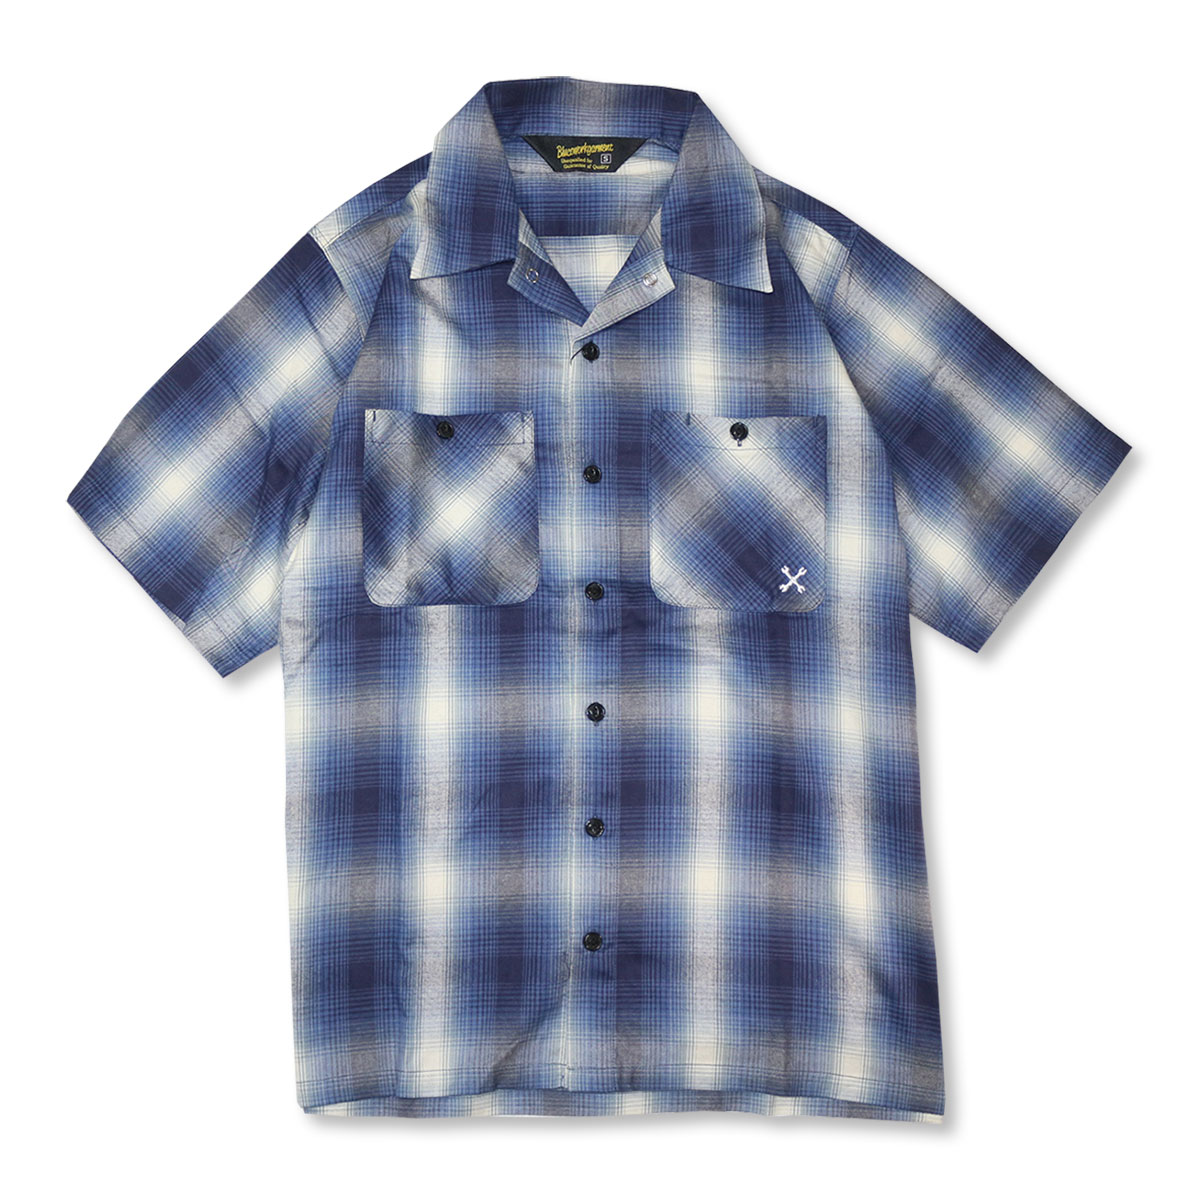 BLUCO(ブルコ) OL-108TO-22 OMBRE WORK SHIRTS S/S 全3色(ブ...